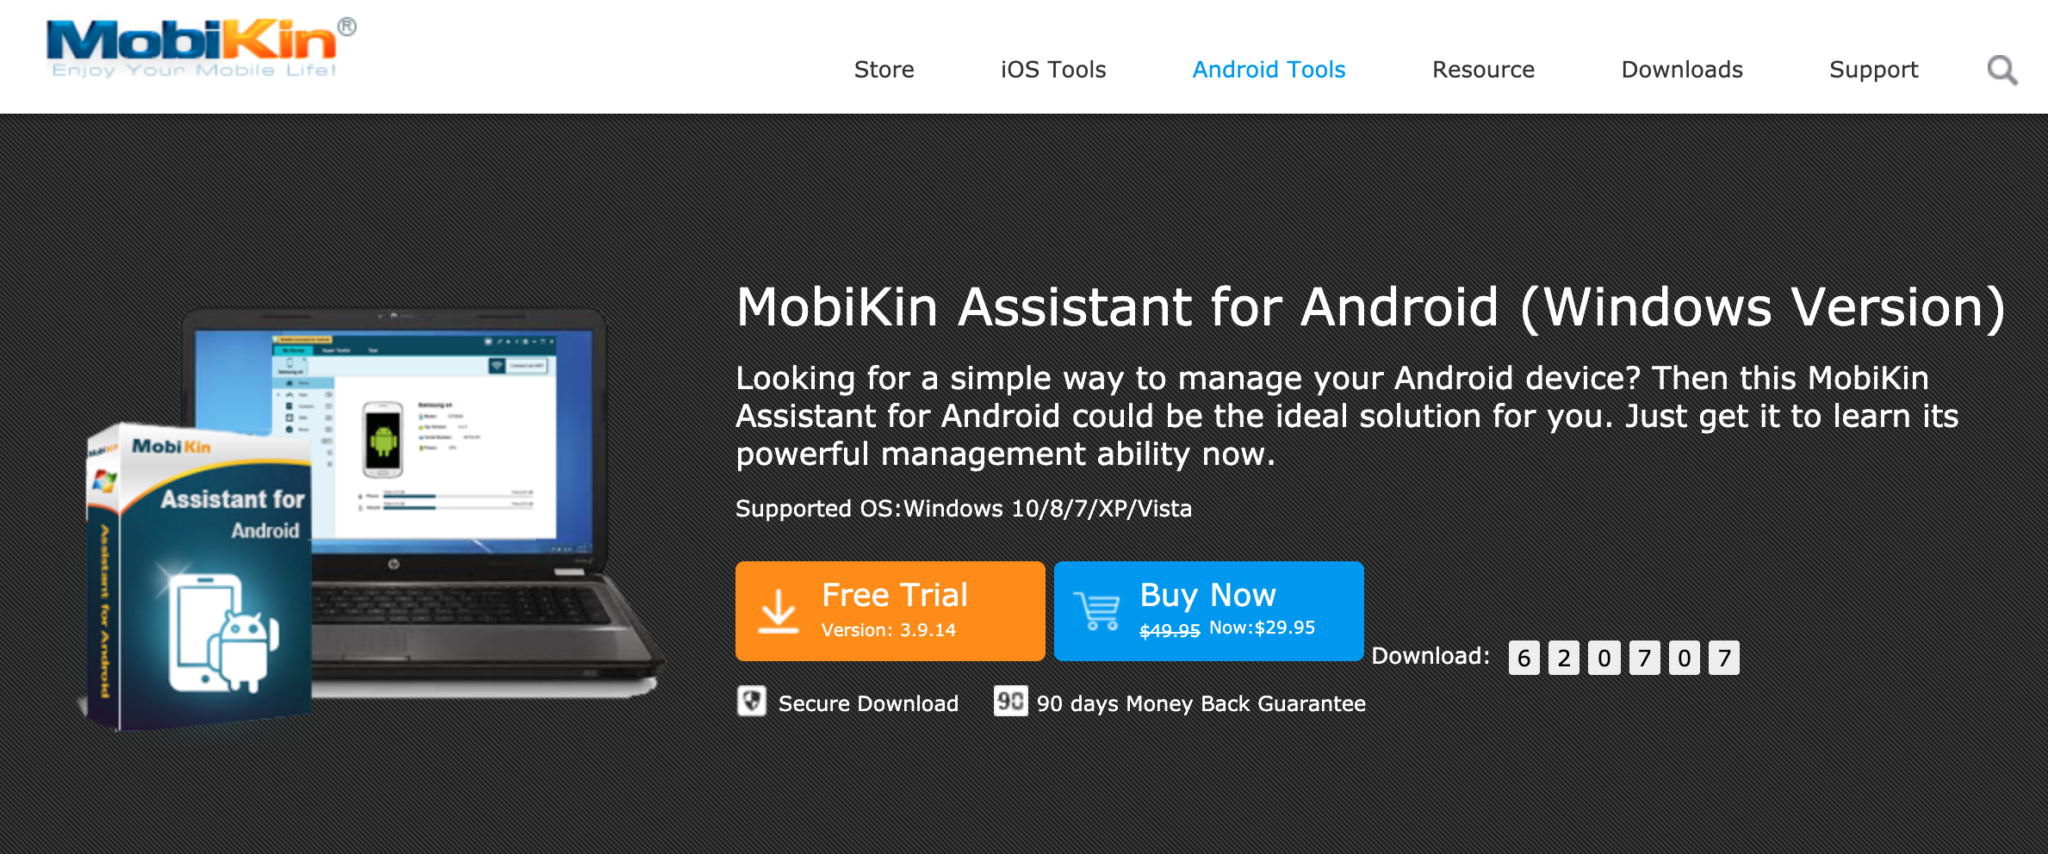 mobikin assistant for android 3.6.41 crack